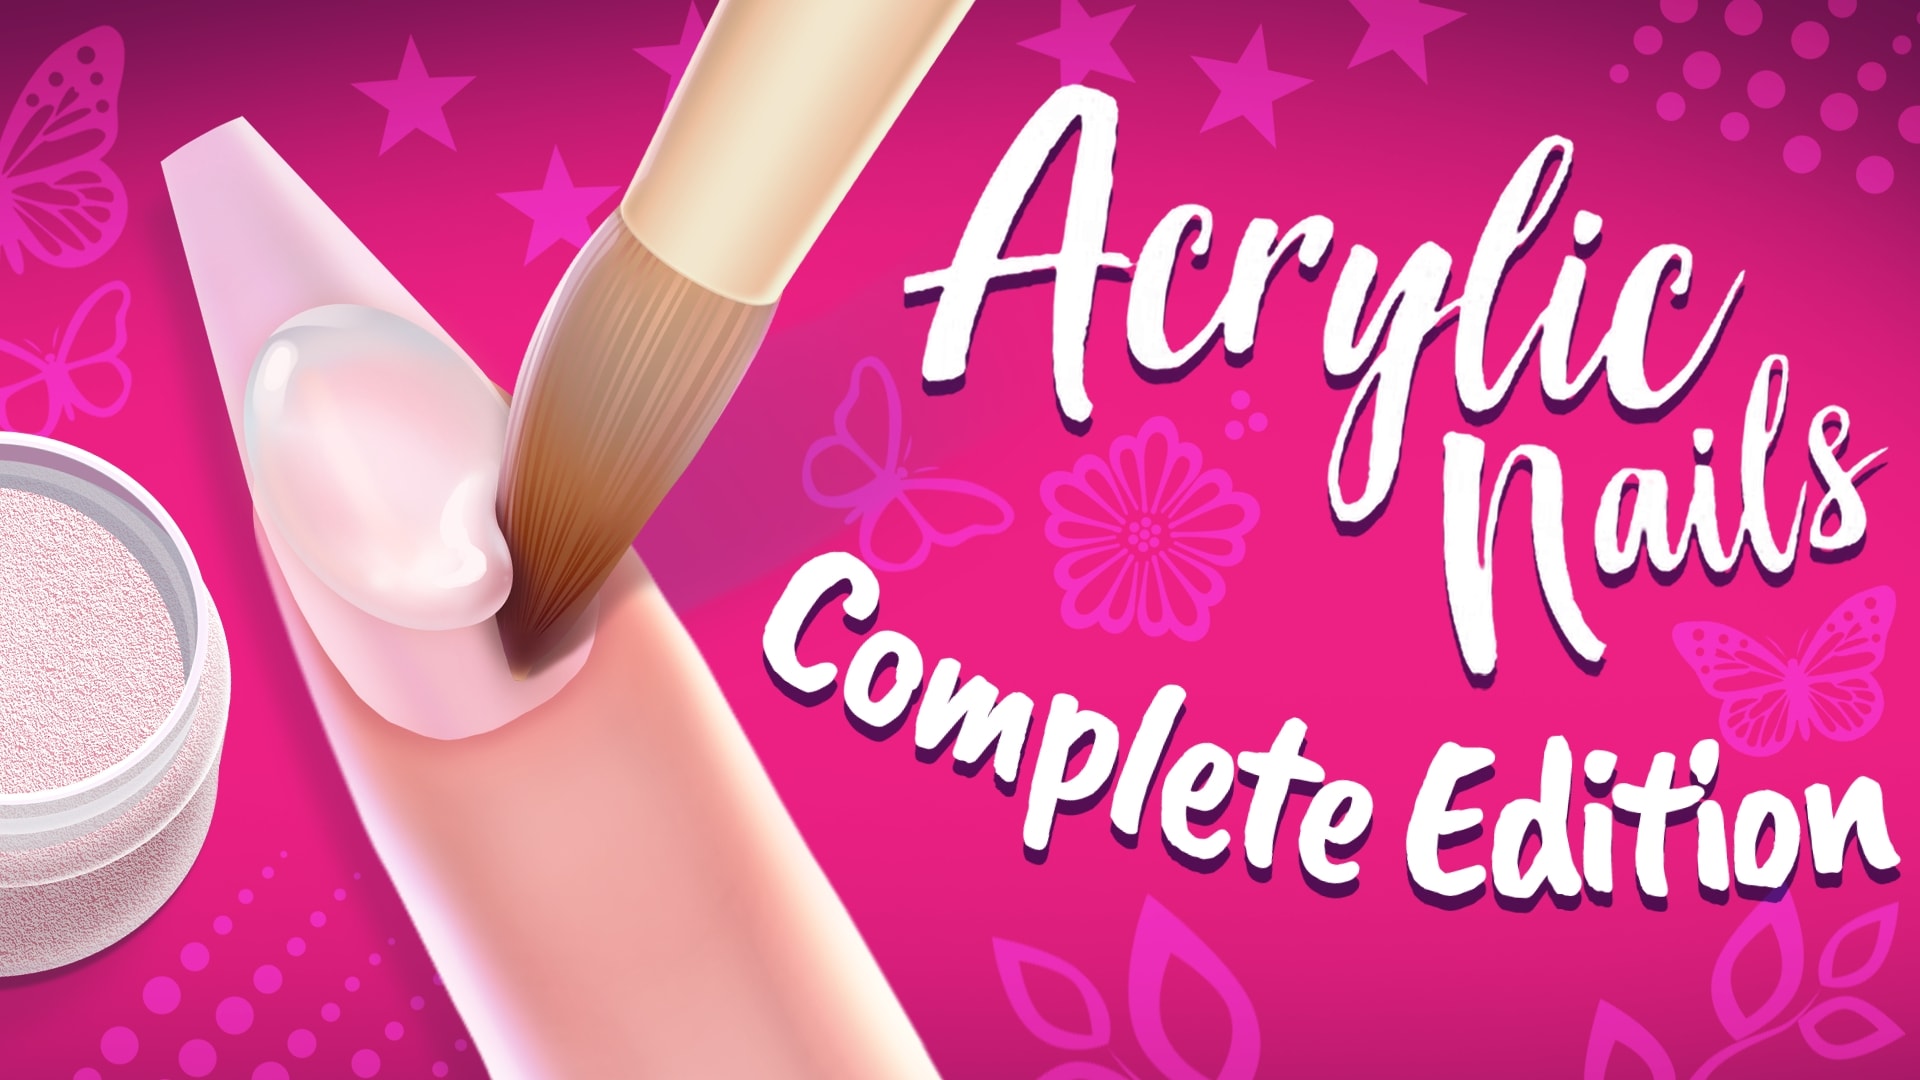 Acrylic Nails!: Complete Edition 1